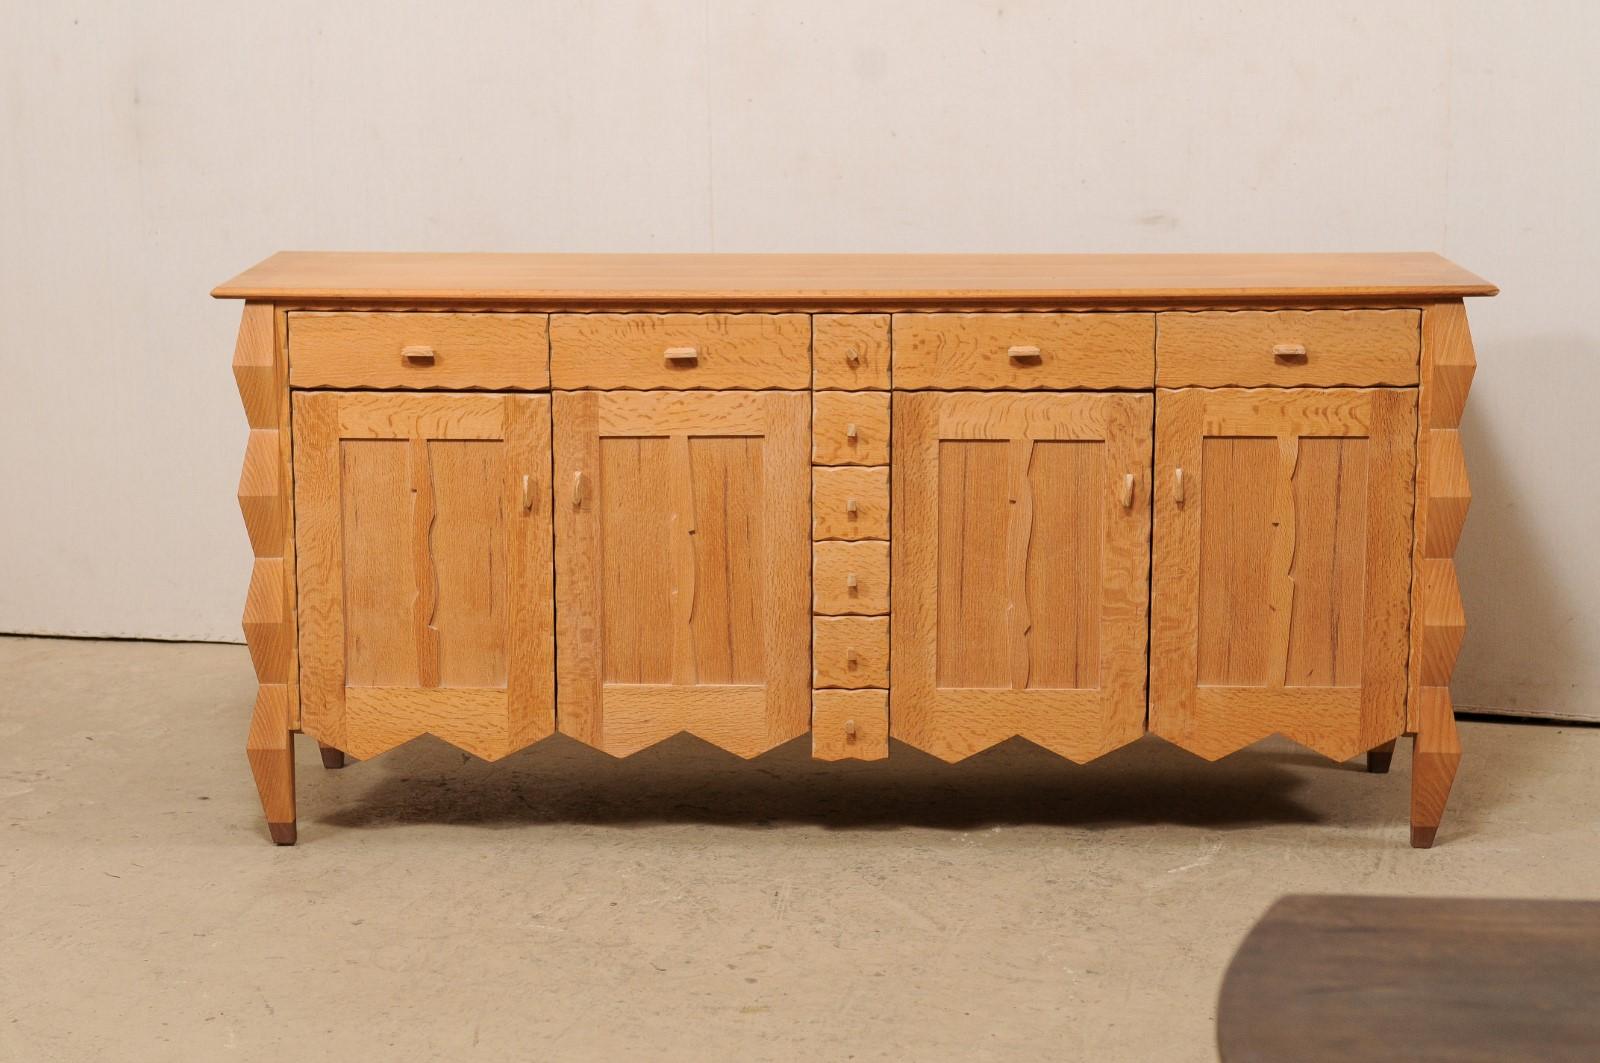 American One-of-a-Kind Artisan Crafted Credenza Cabinet, Whimsical & Geometric Design